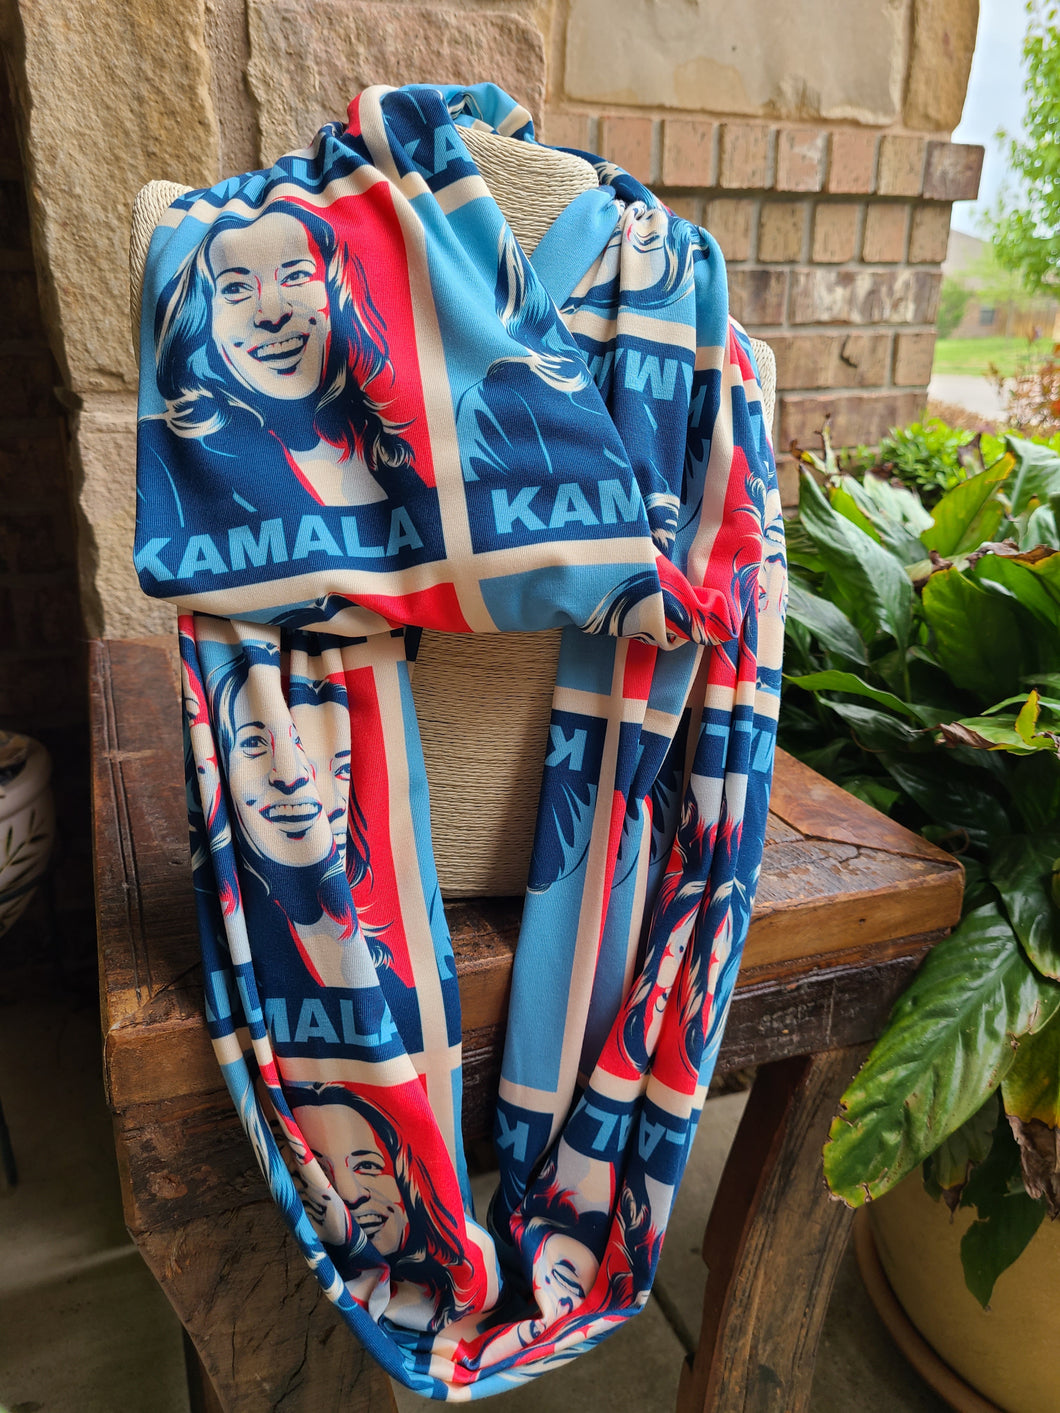 Infinity Scarves - Infinity Scarf Made With Fabric Inspired by Madam Vice President - Kamala Harris